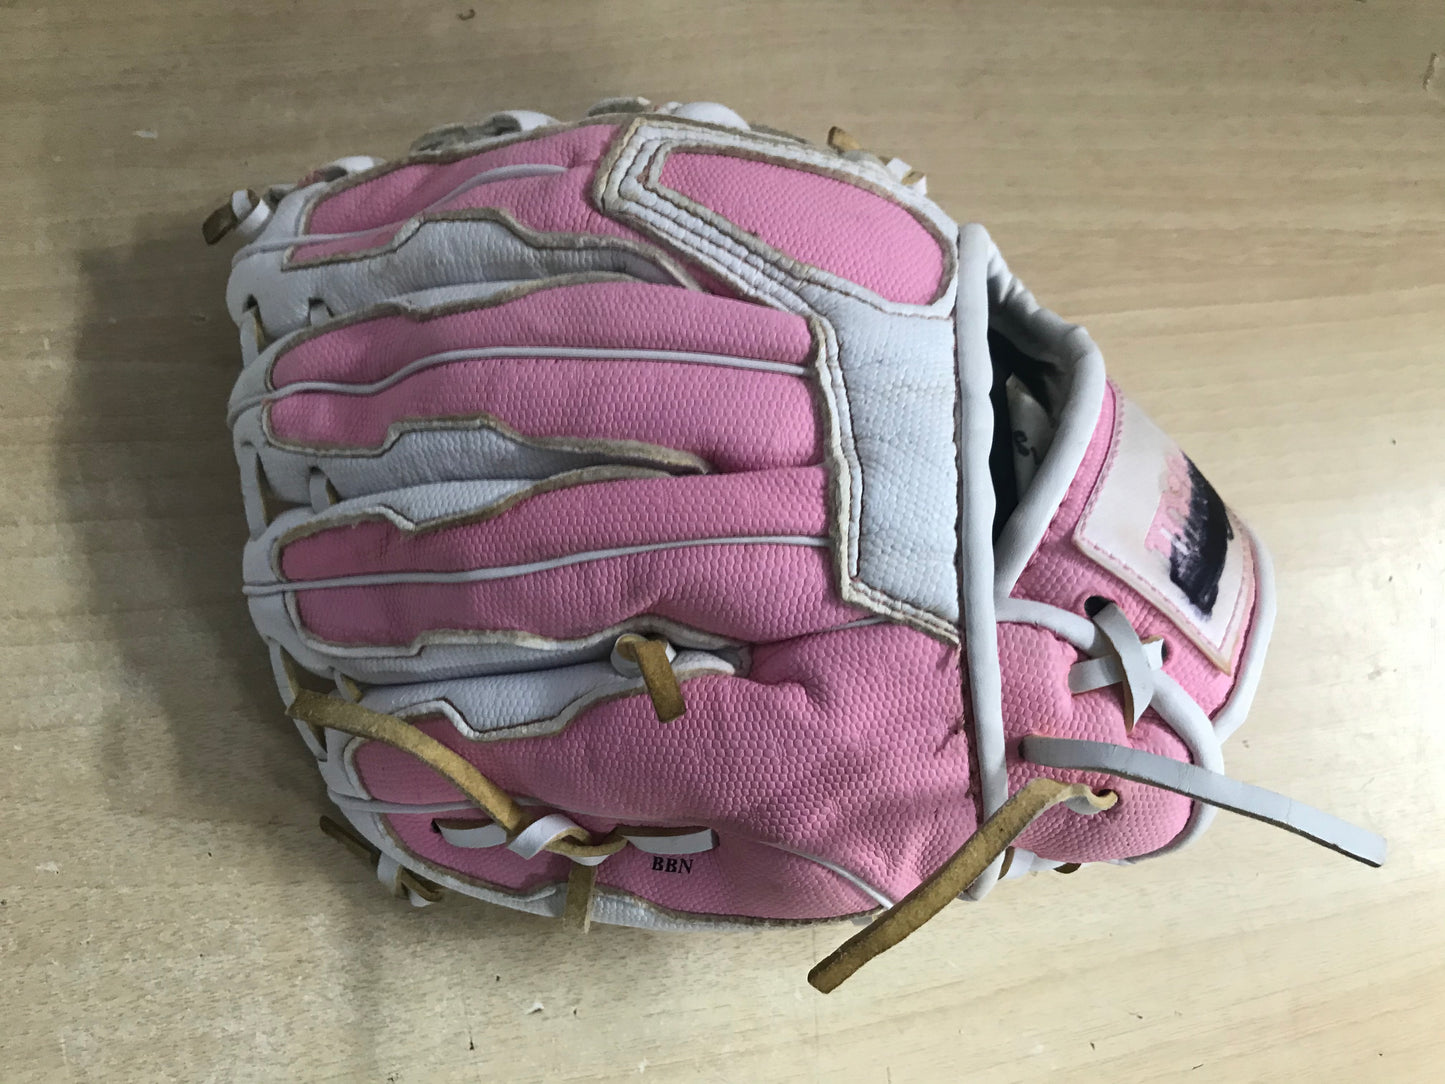 Baseball Glove Child Size 10 inch Wilson Pink White Soft Bends Well Fits on Left Hand